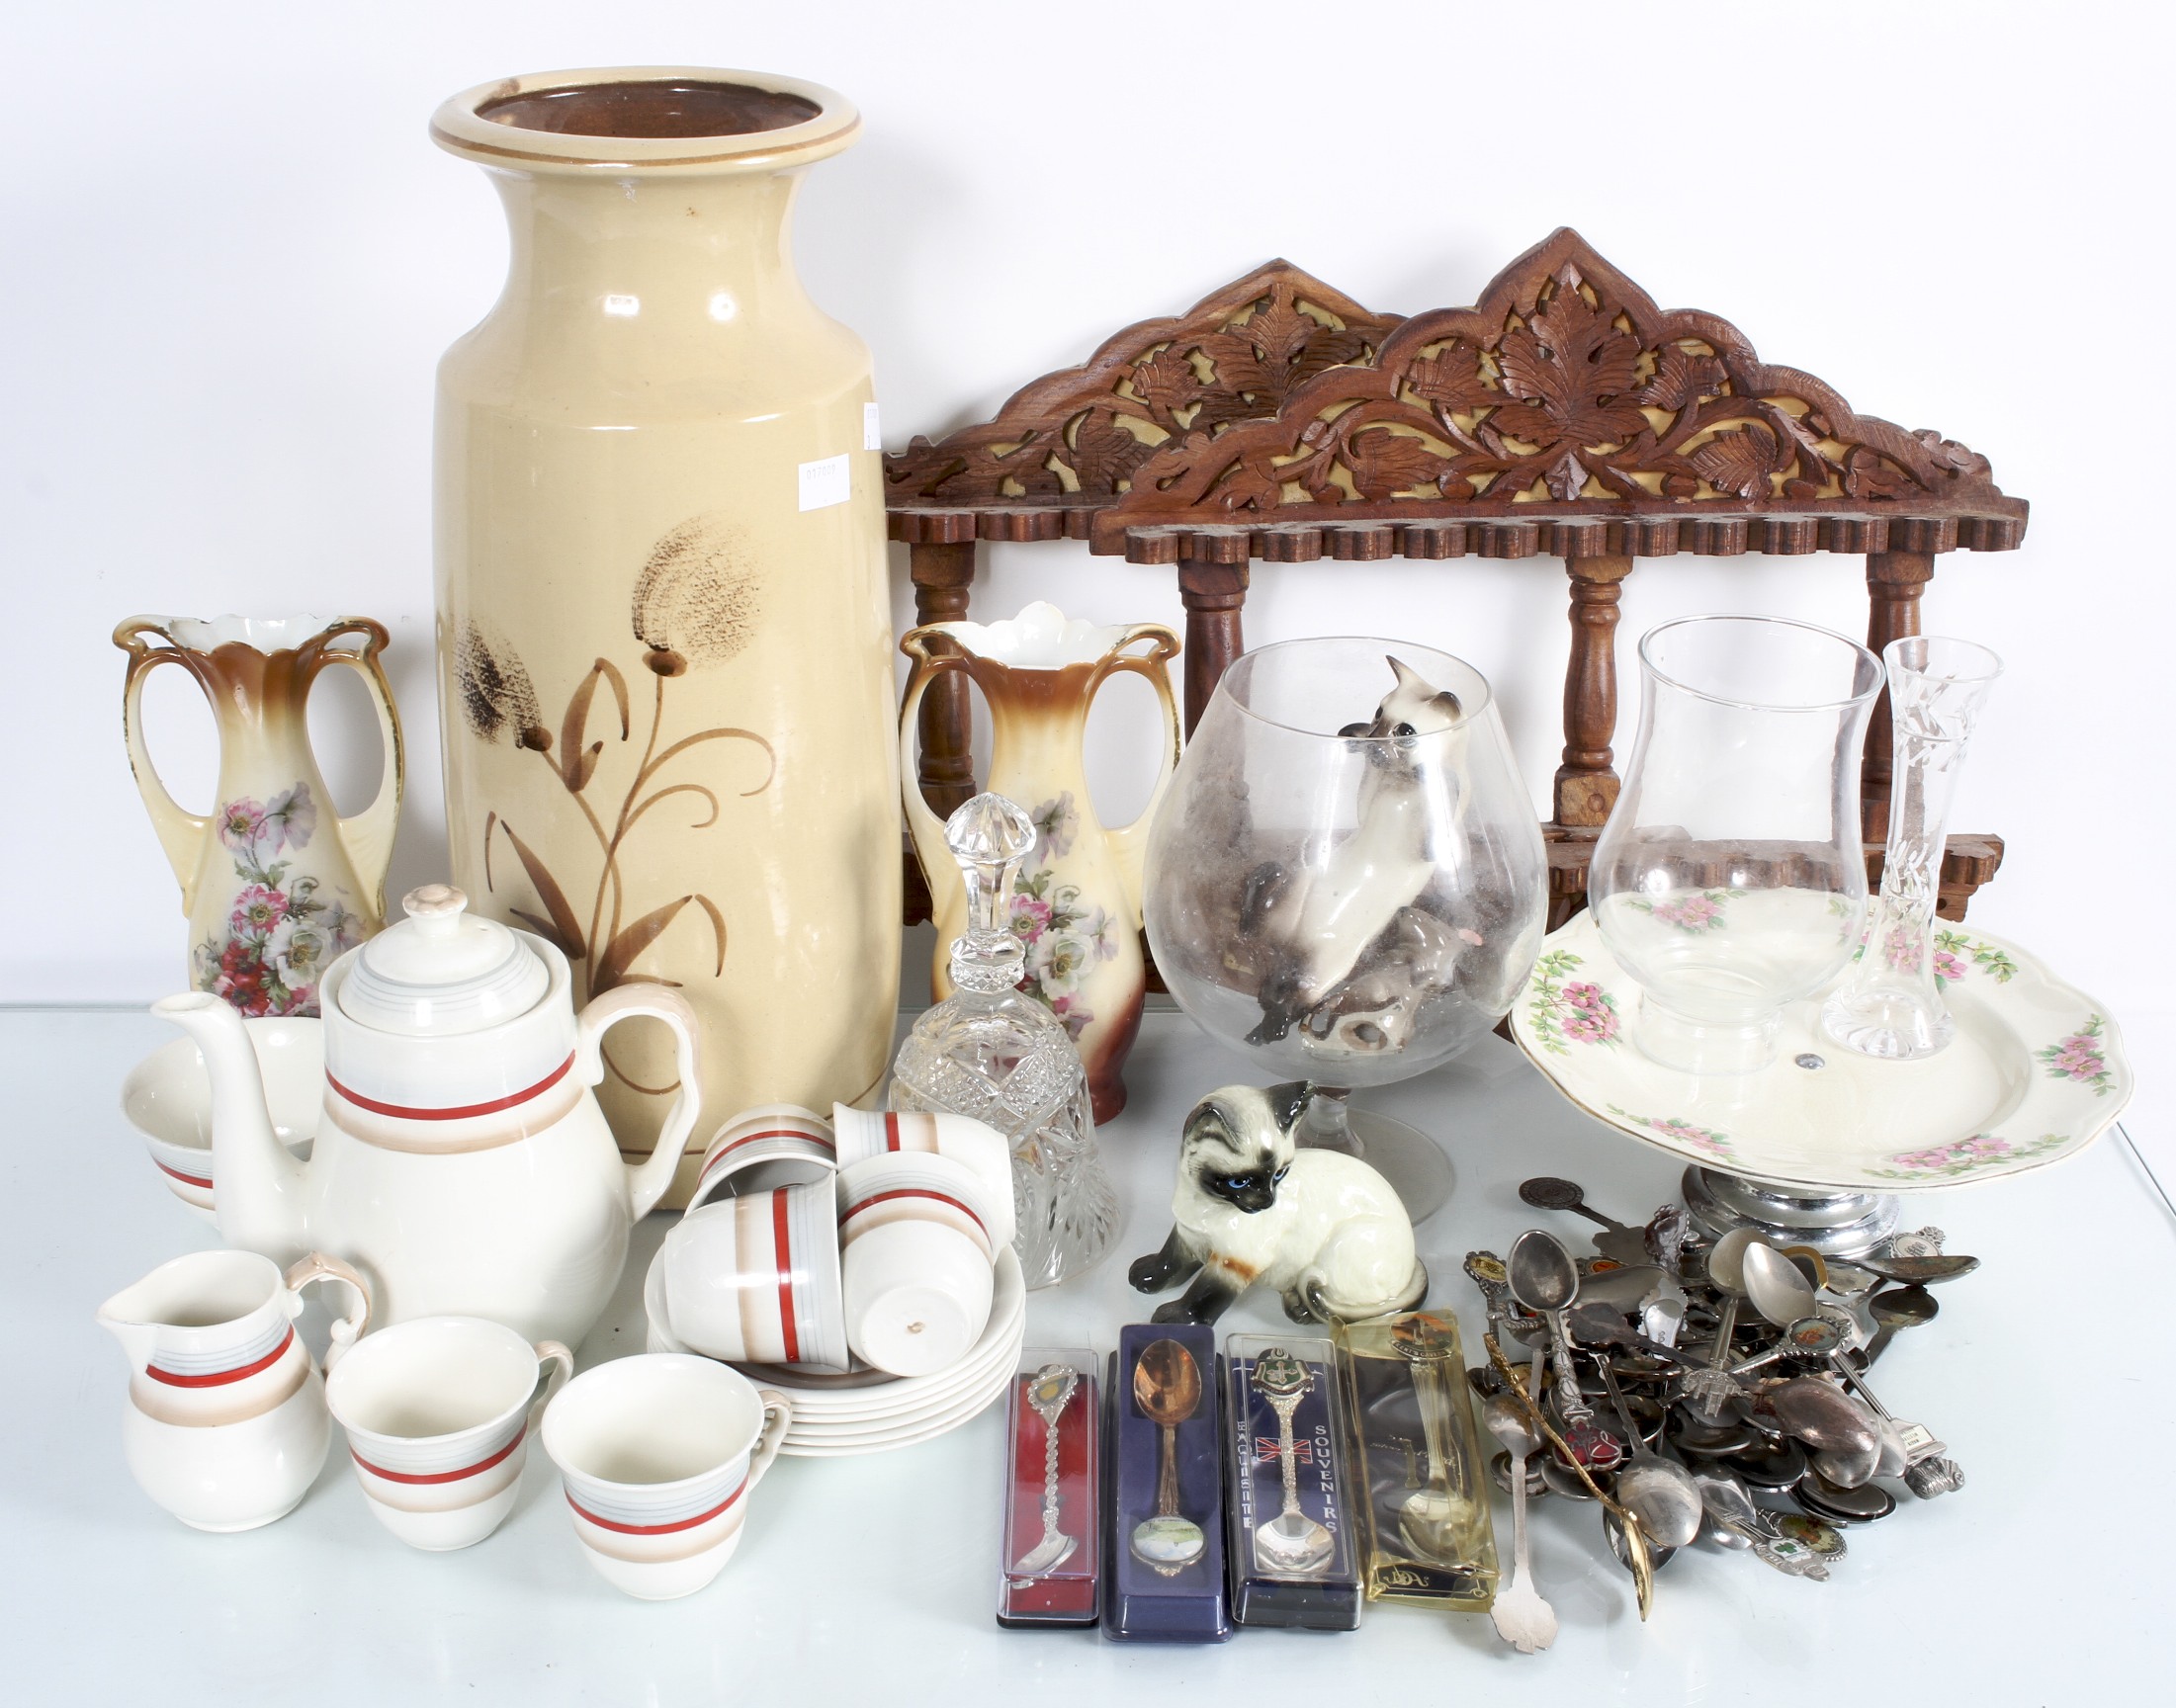 A 'Mid Winter' coffee service and other ceramics